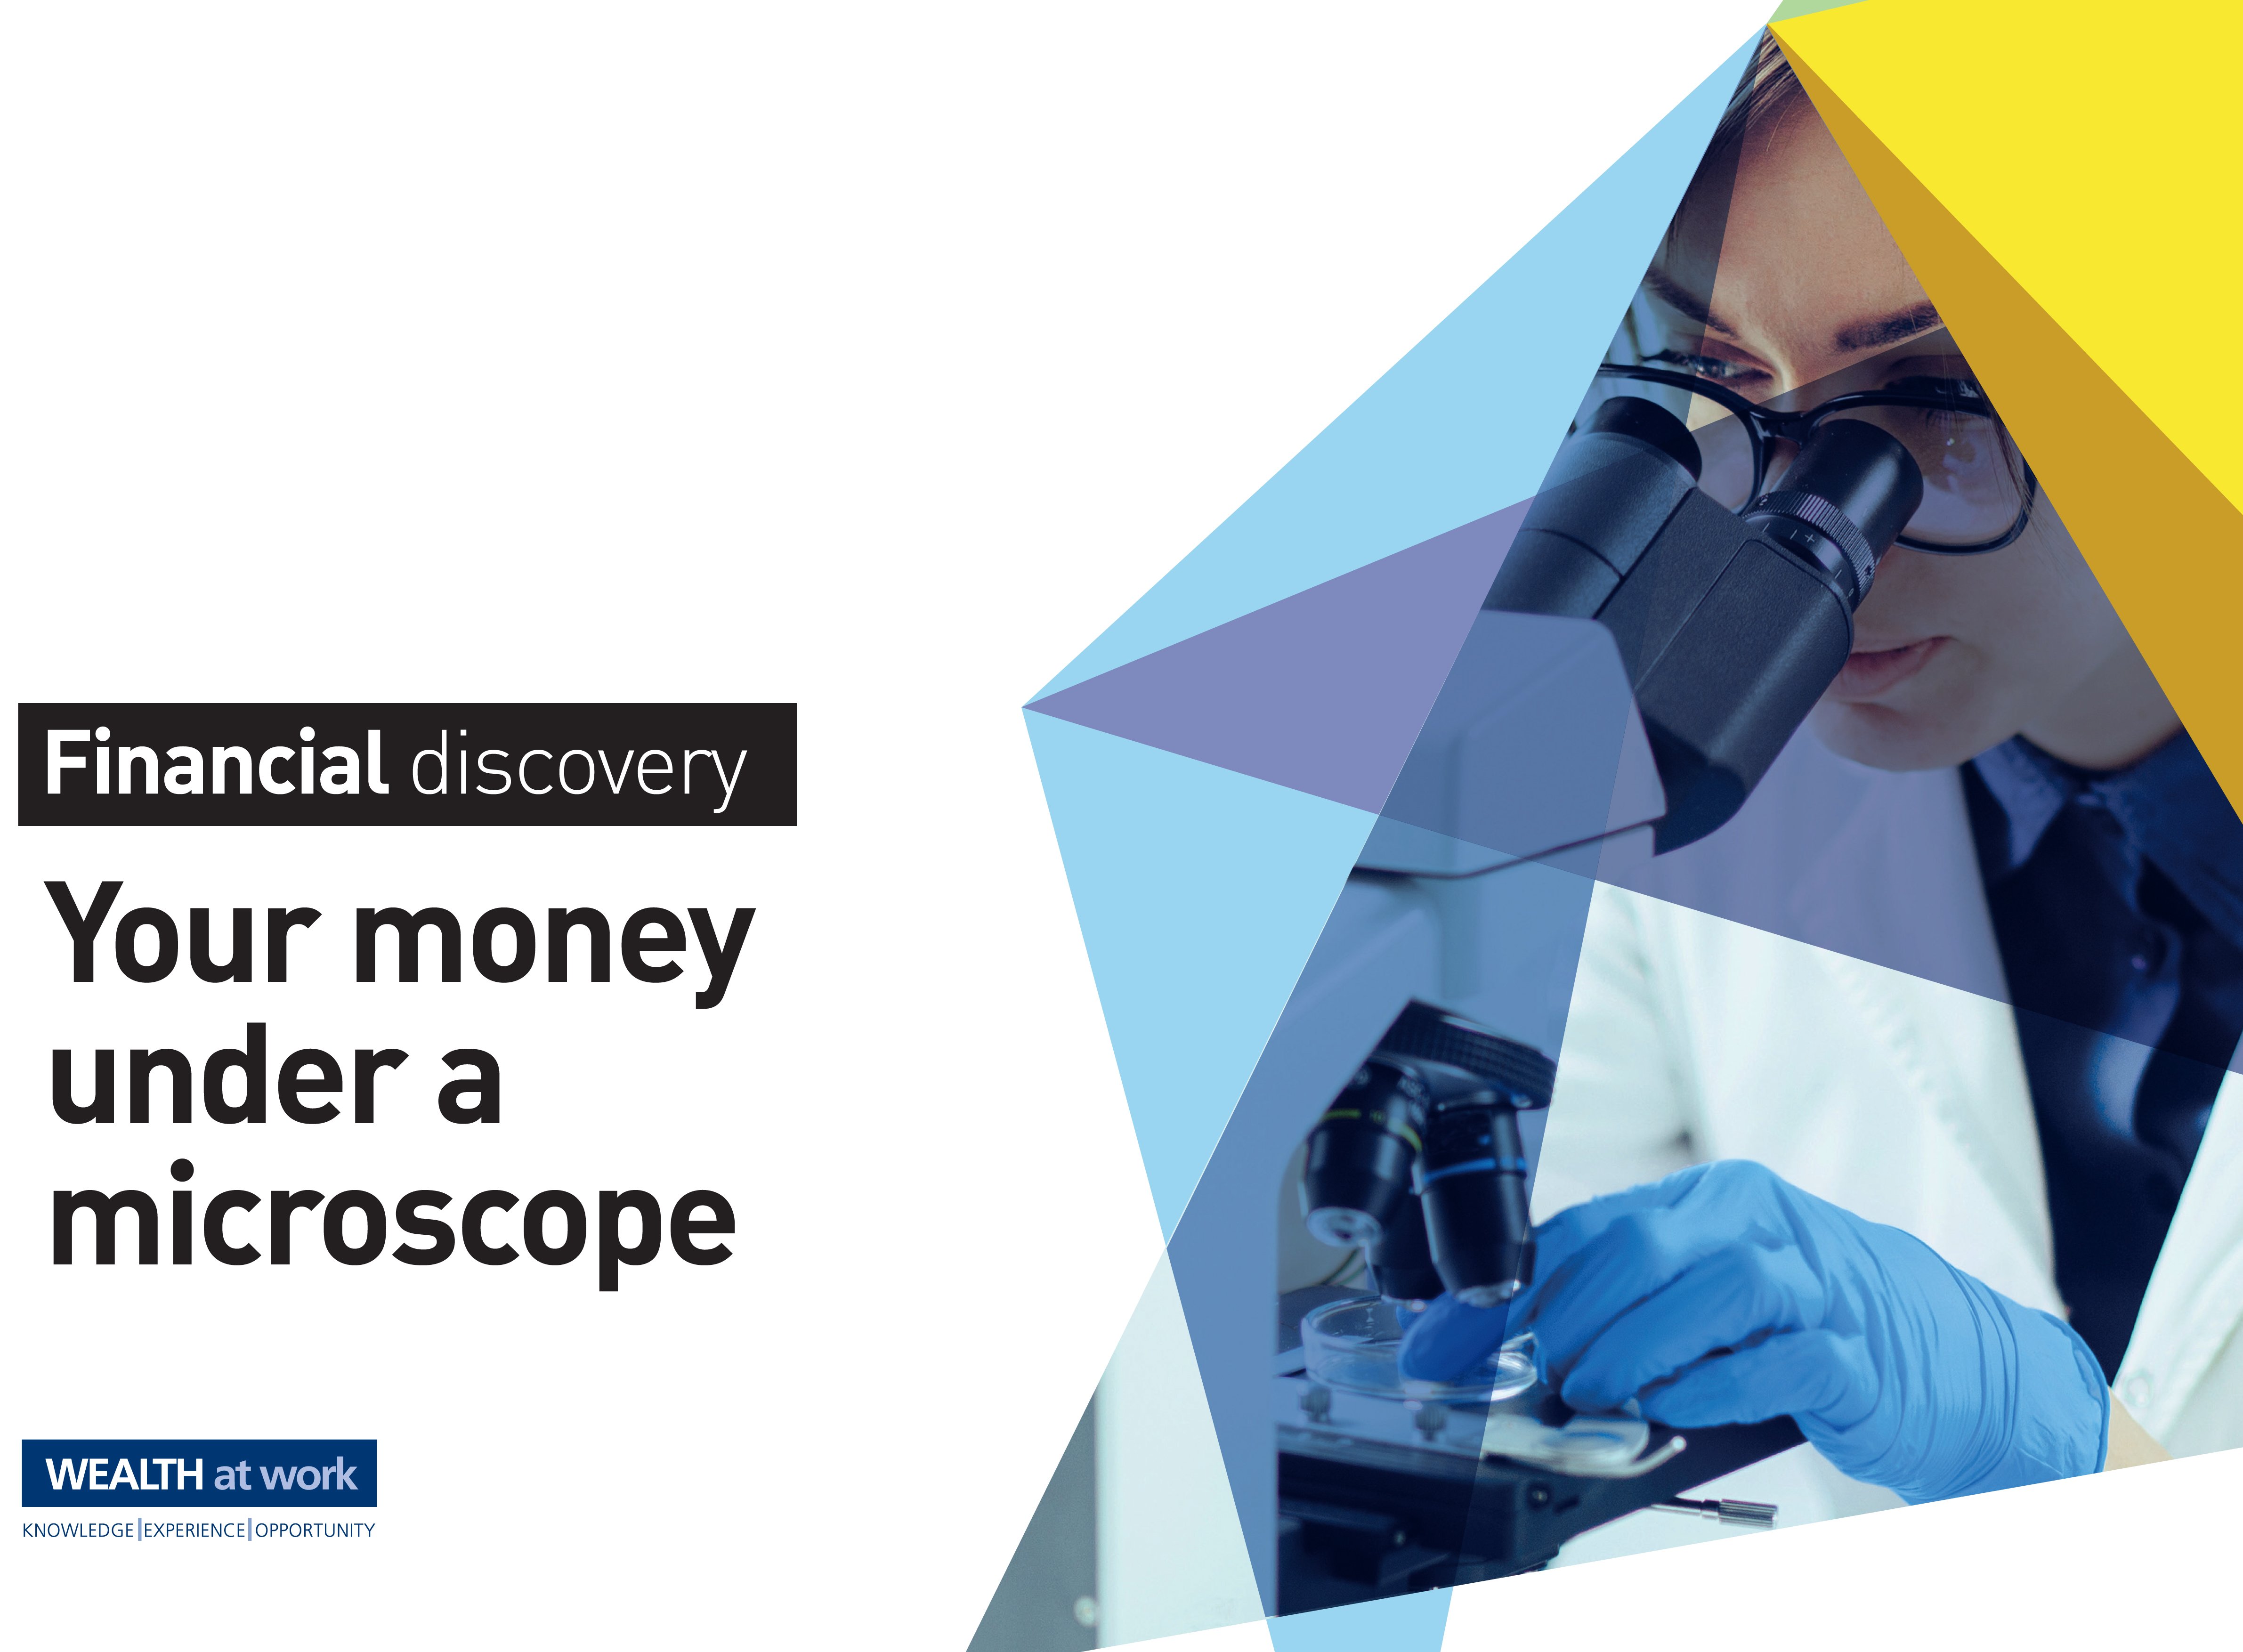 image reads "financial discovery - your money under a microscope"